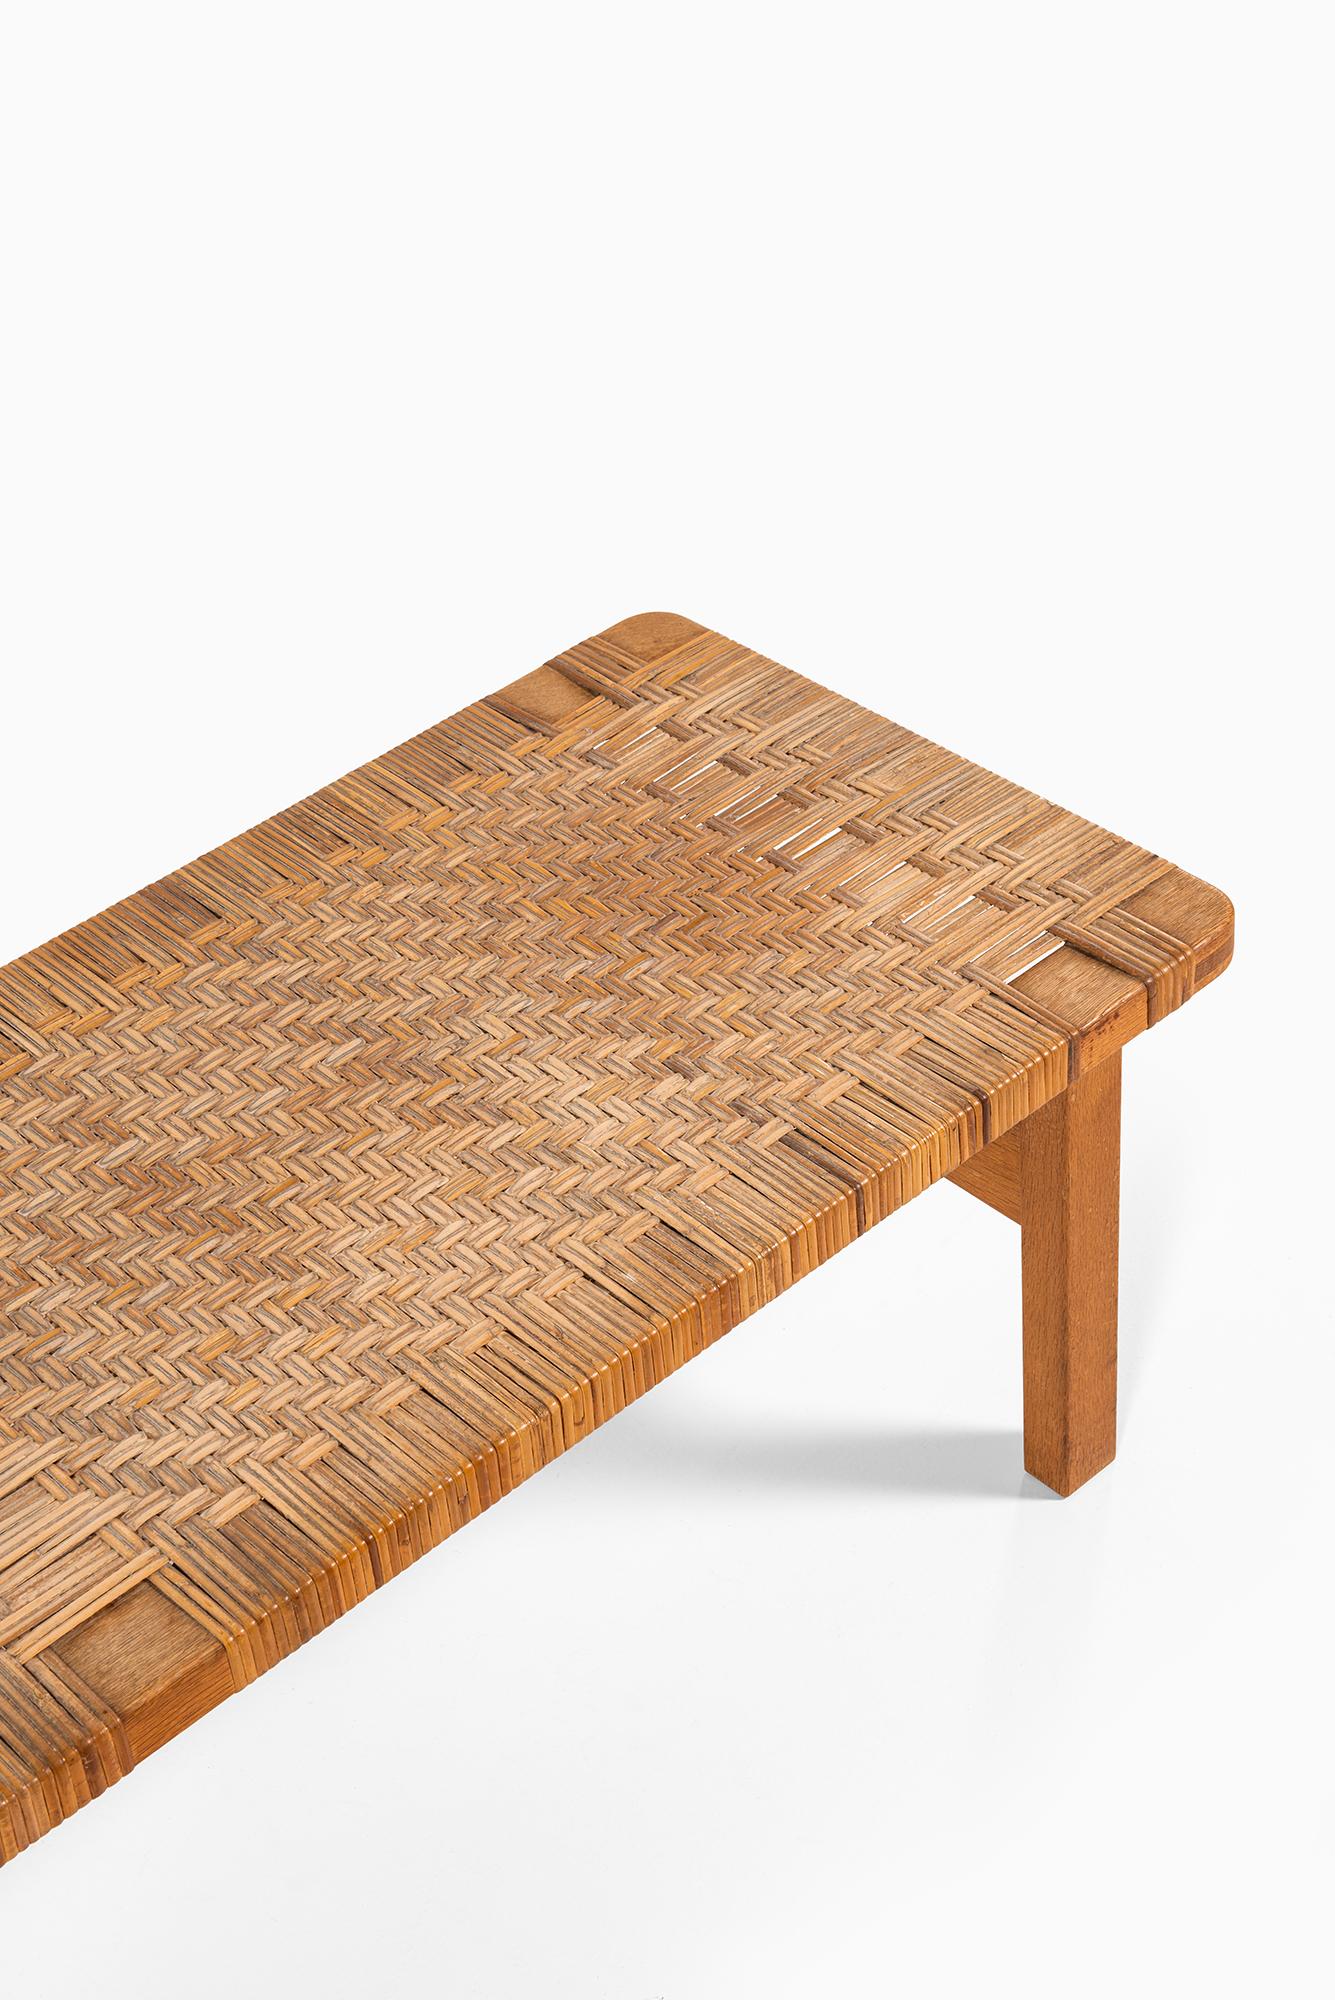 Rare side table in oak and woven cane designed by Børge Mogensen. Produced by Fredericia Stolefabrik in Denmark.